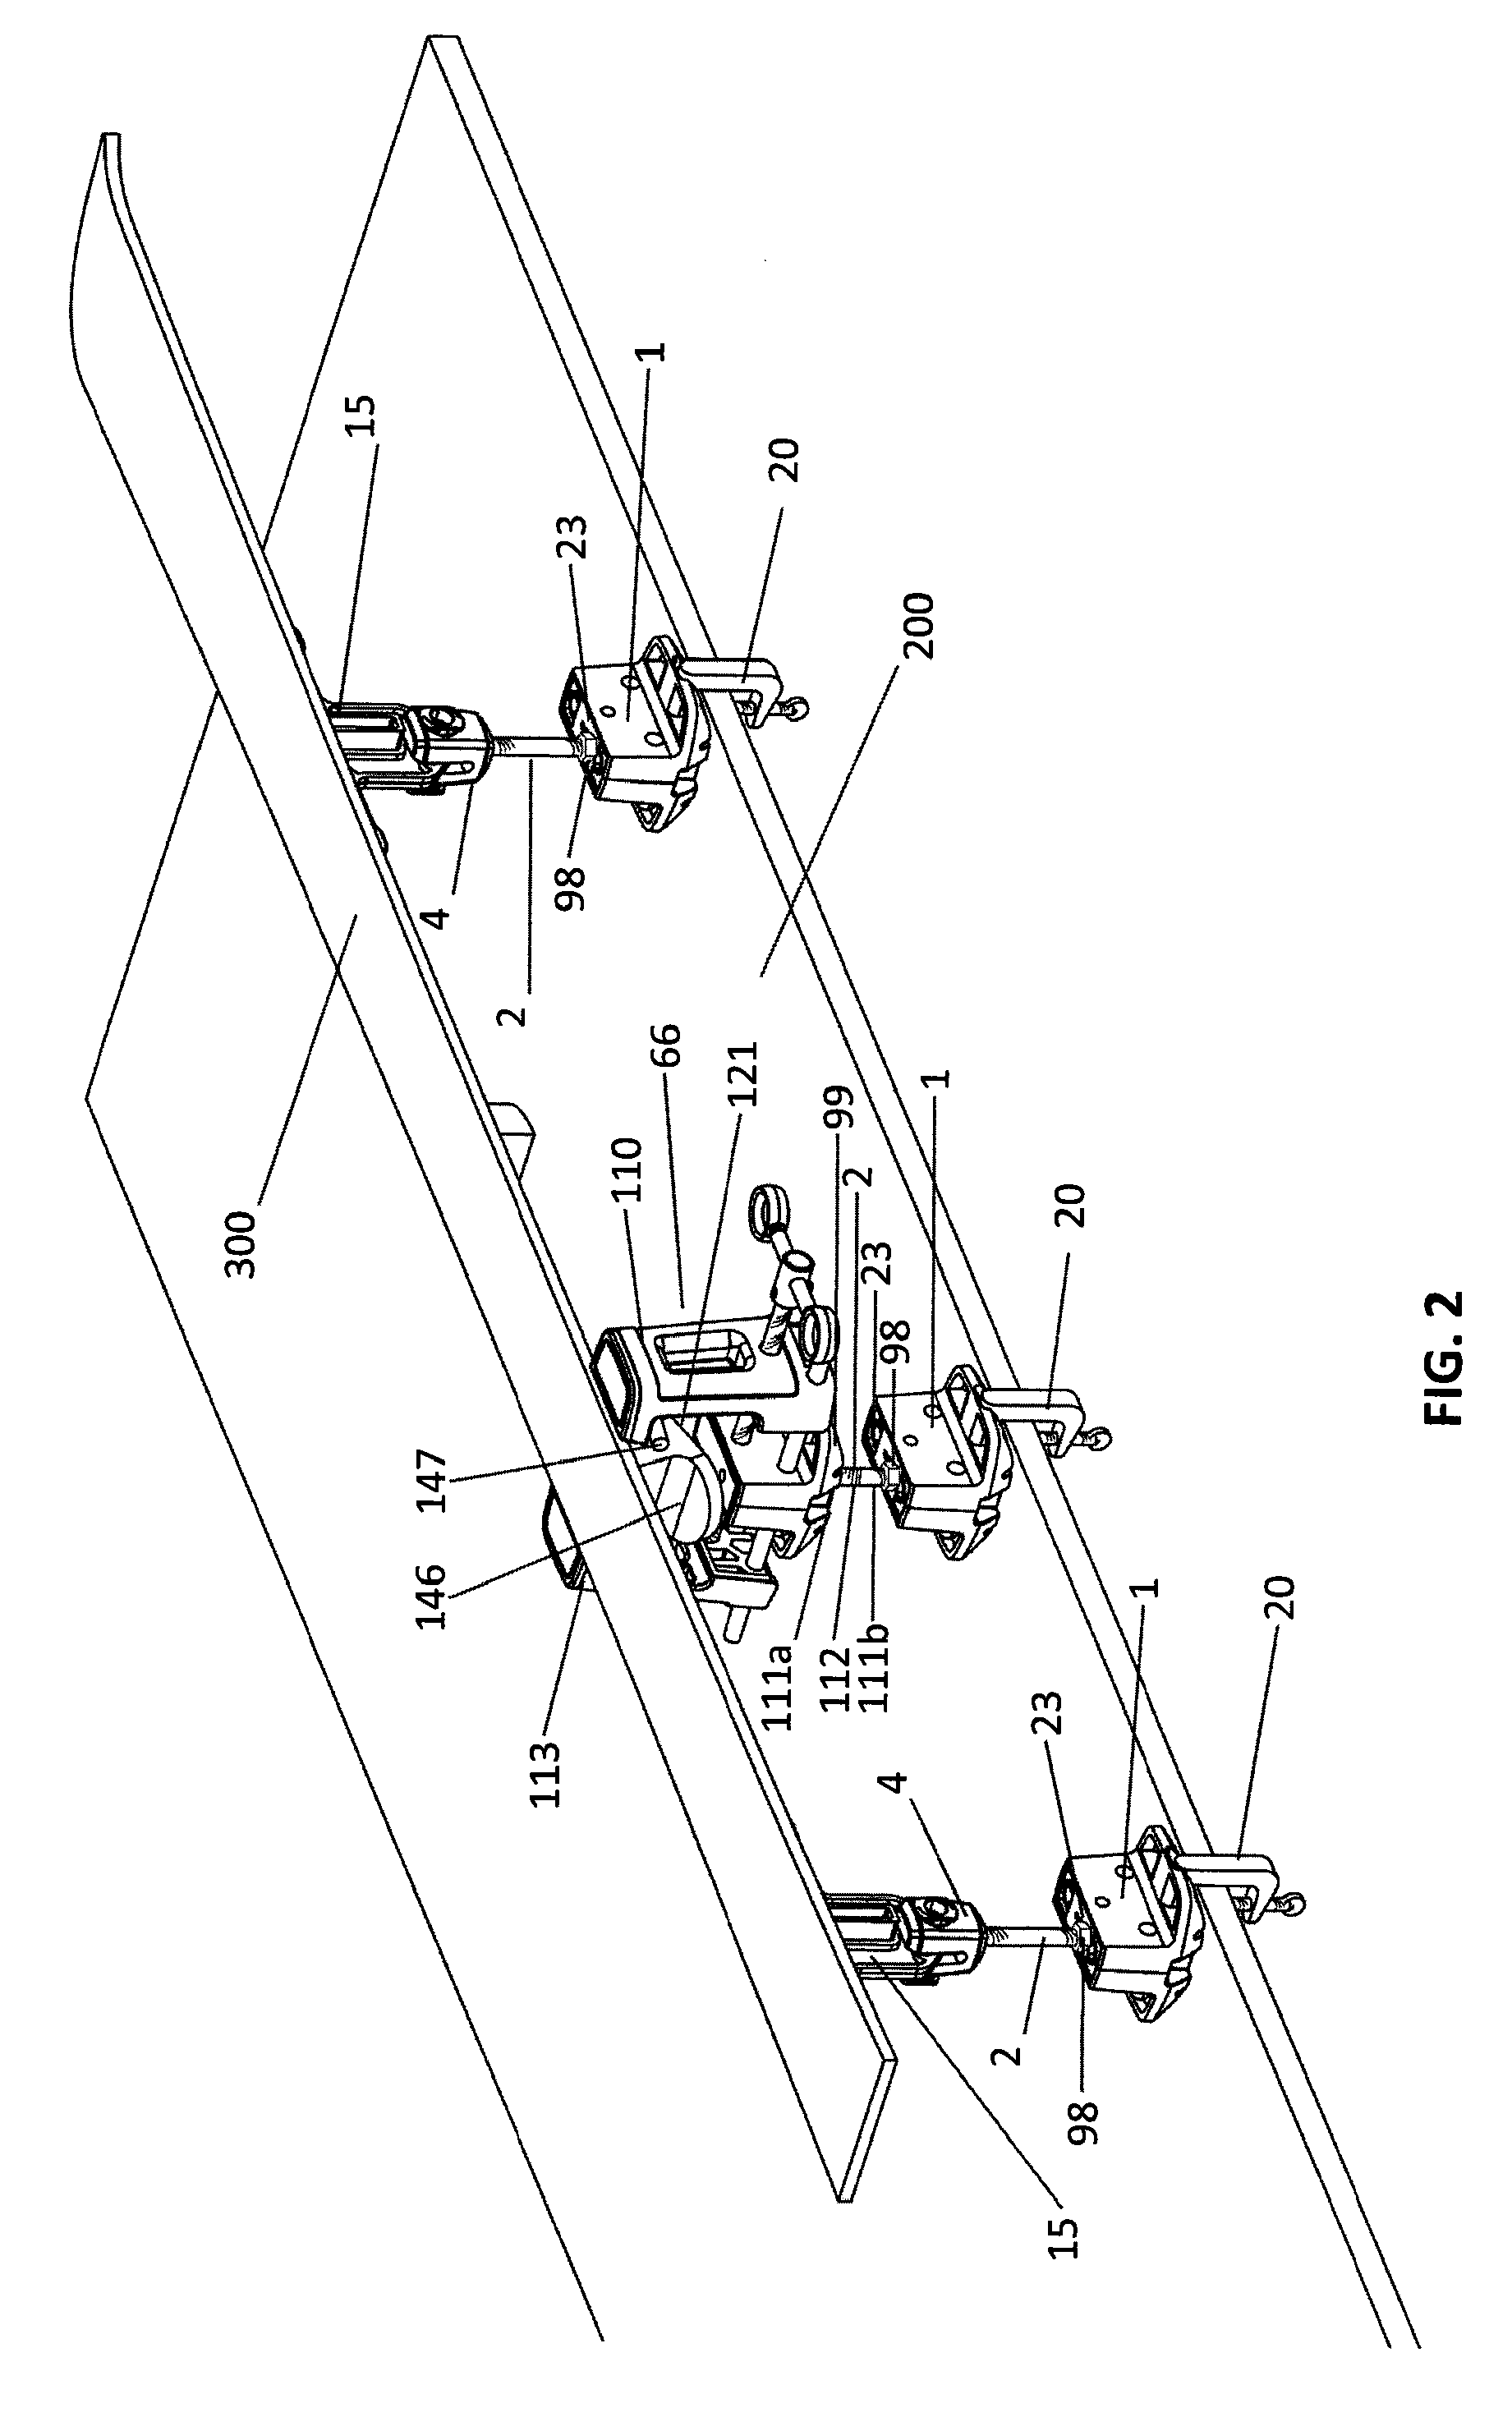 Sports equipment holding device